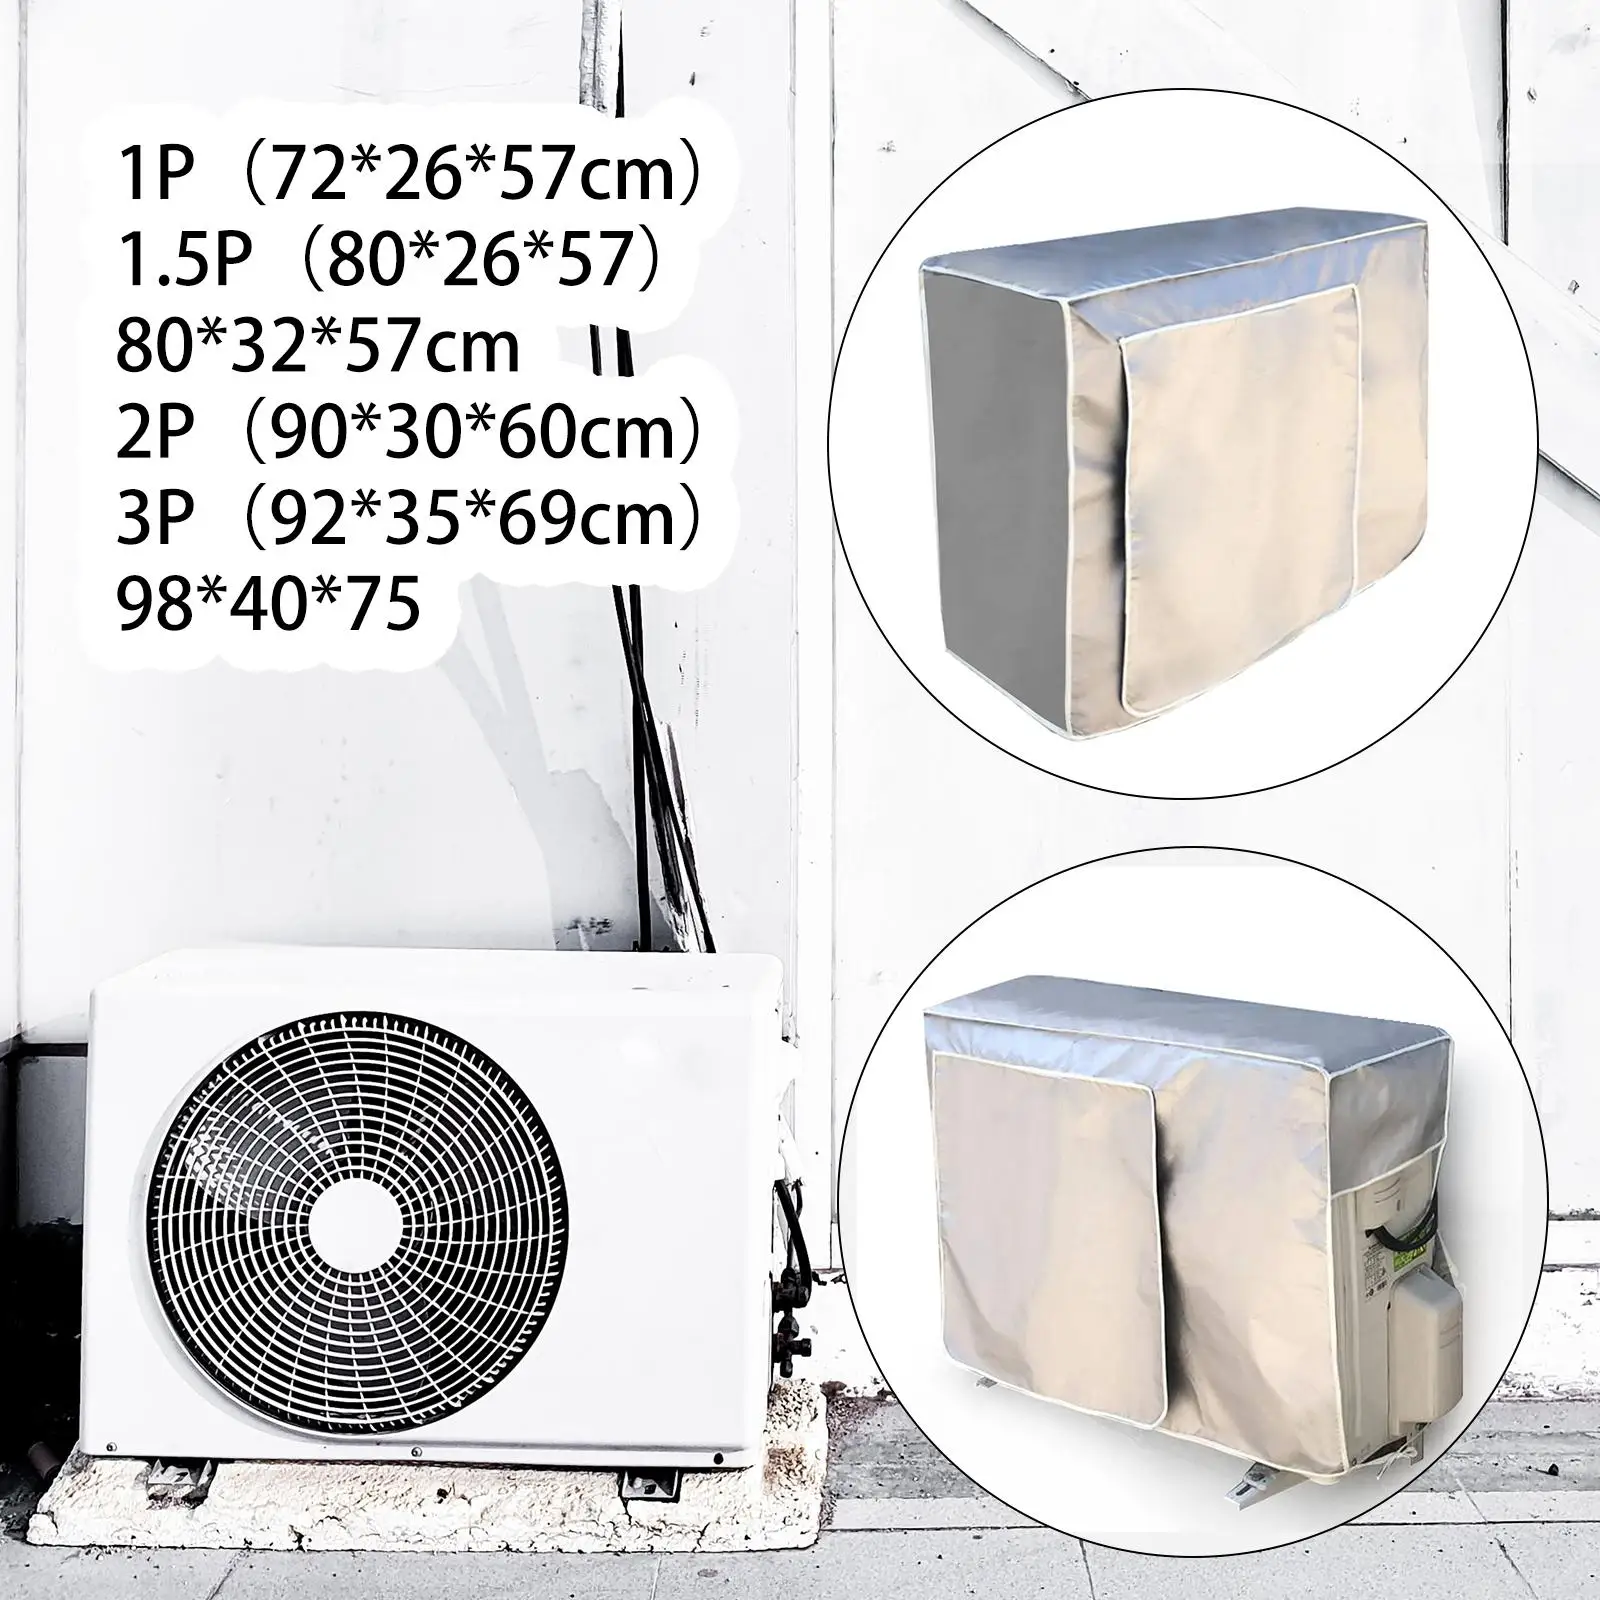 Outside House Air Conditioner Cover Anti Conditioner Split Unit Dustproof Waterproof Cover Silver Coating 